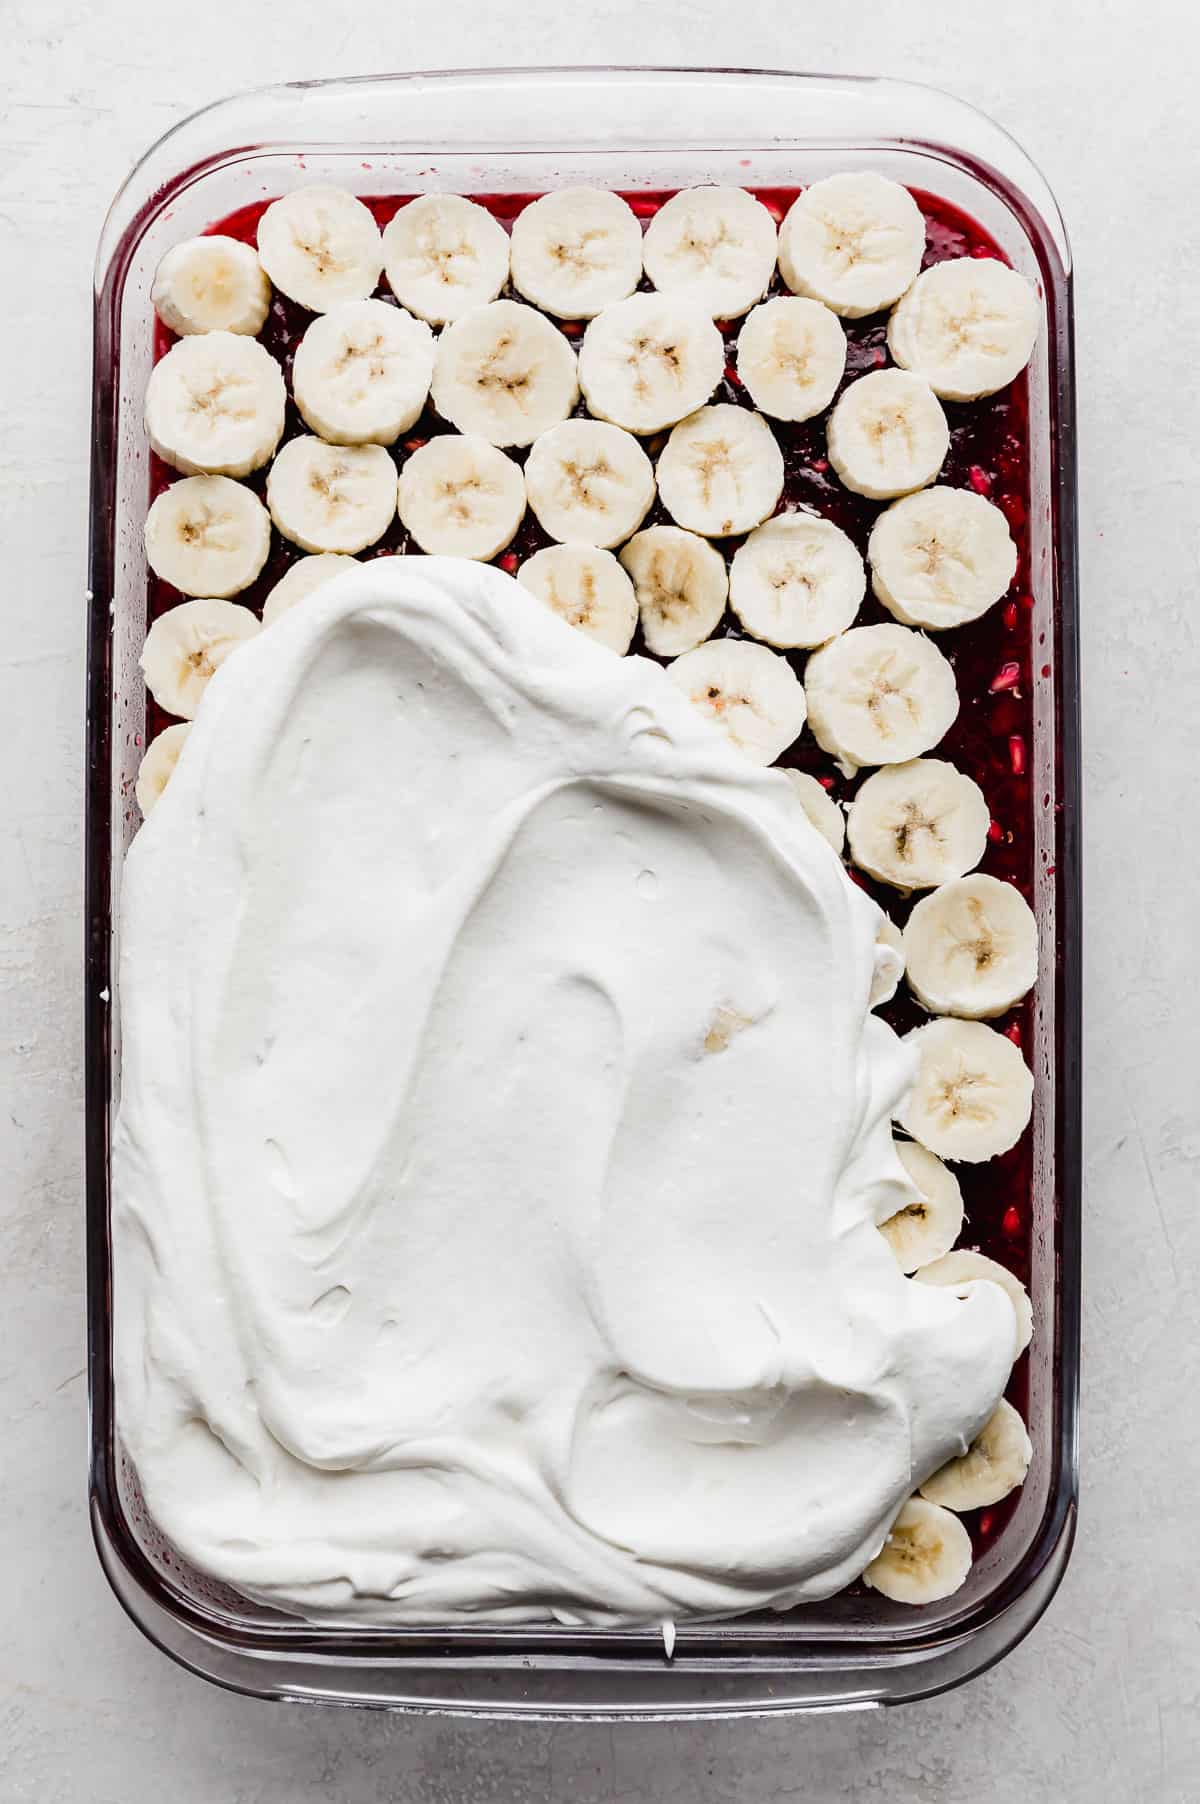 Whipped cream spread overtop half of the sliced bananas that are overtop the red Pomegranate Jell-O.